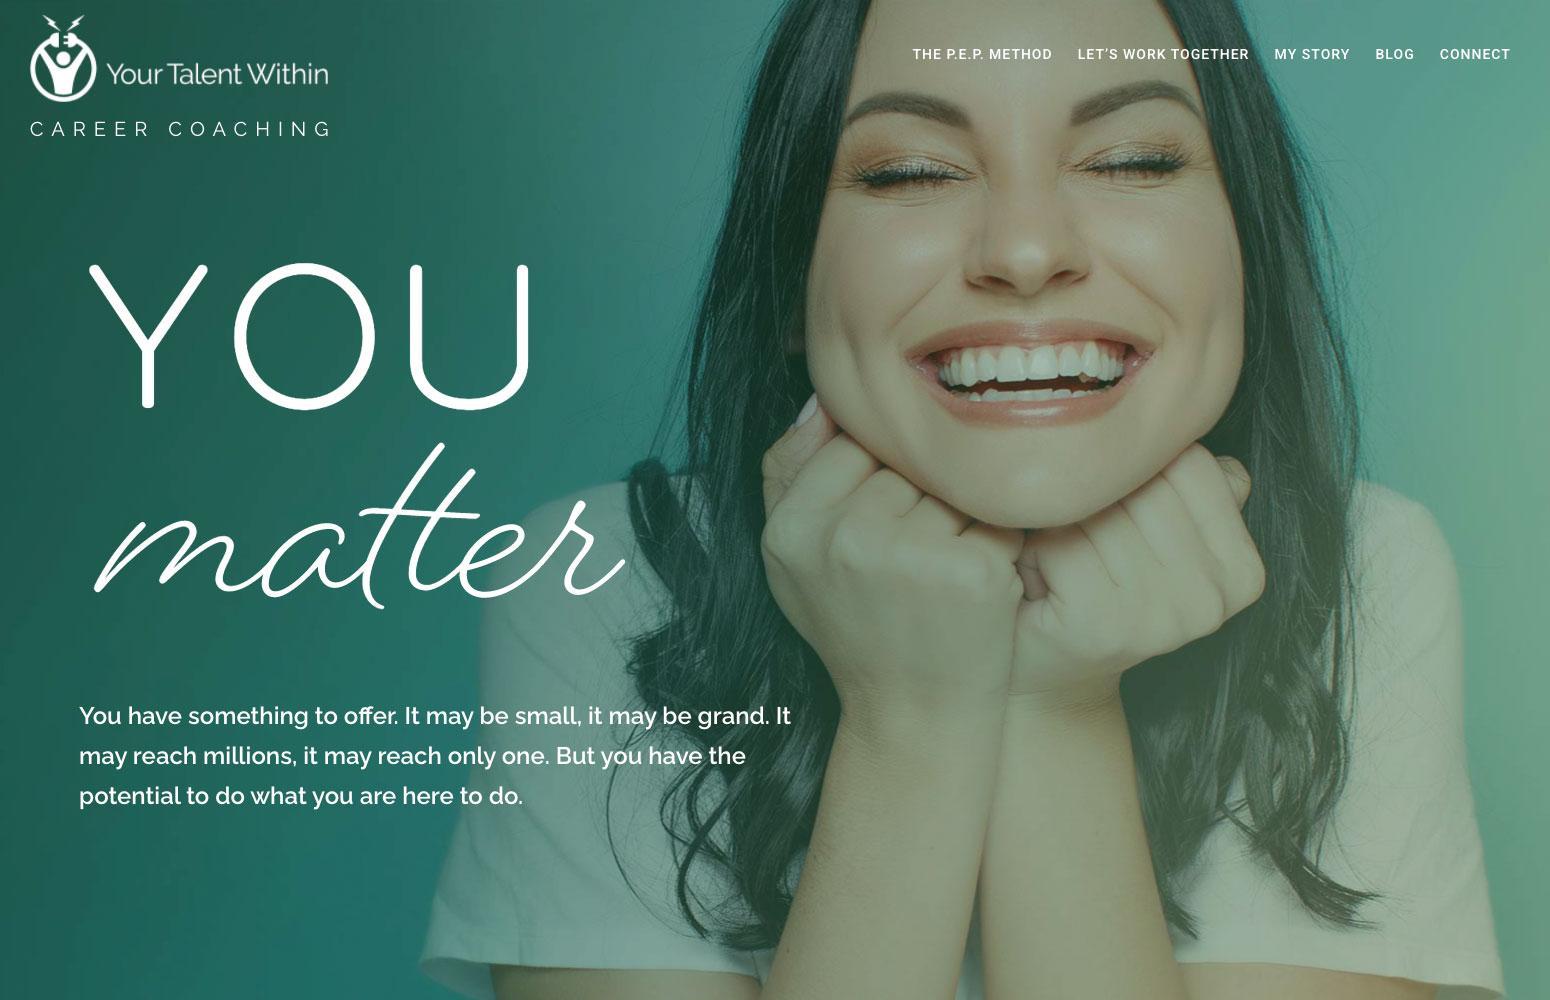 your-talent-within-wordpress-website-smiling-woman